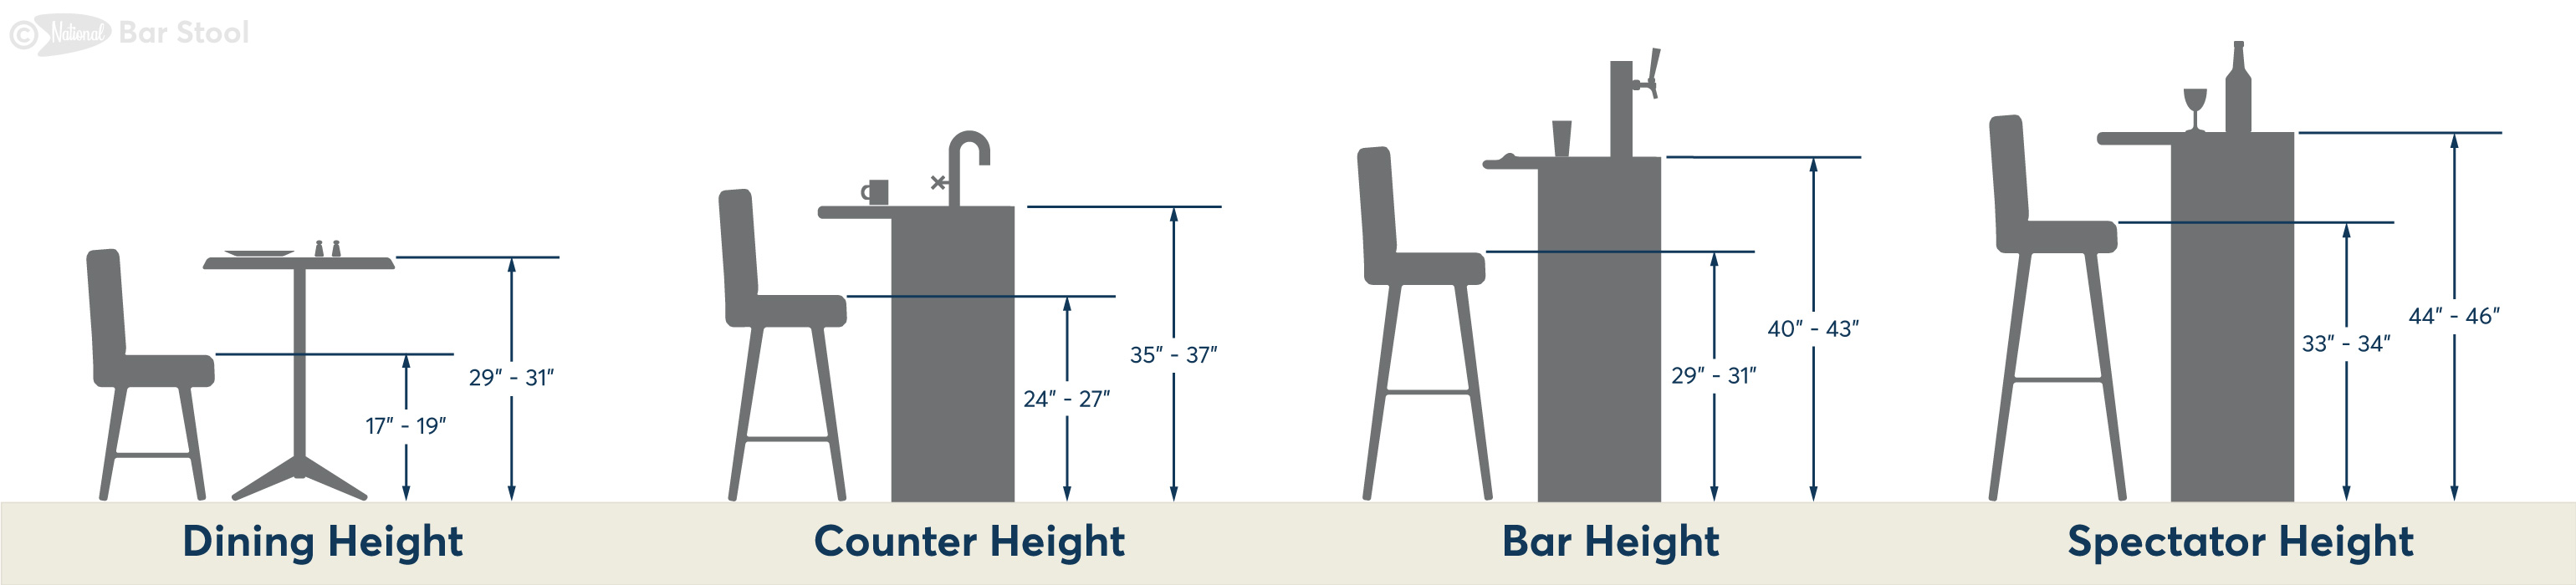 Bar Stool Ing Guide National, Bar Vs Counter Height Stools